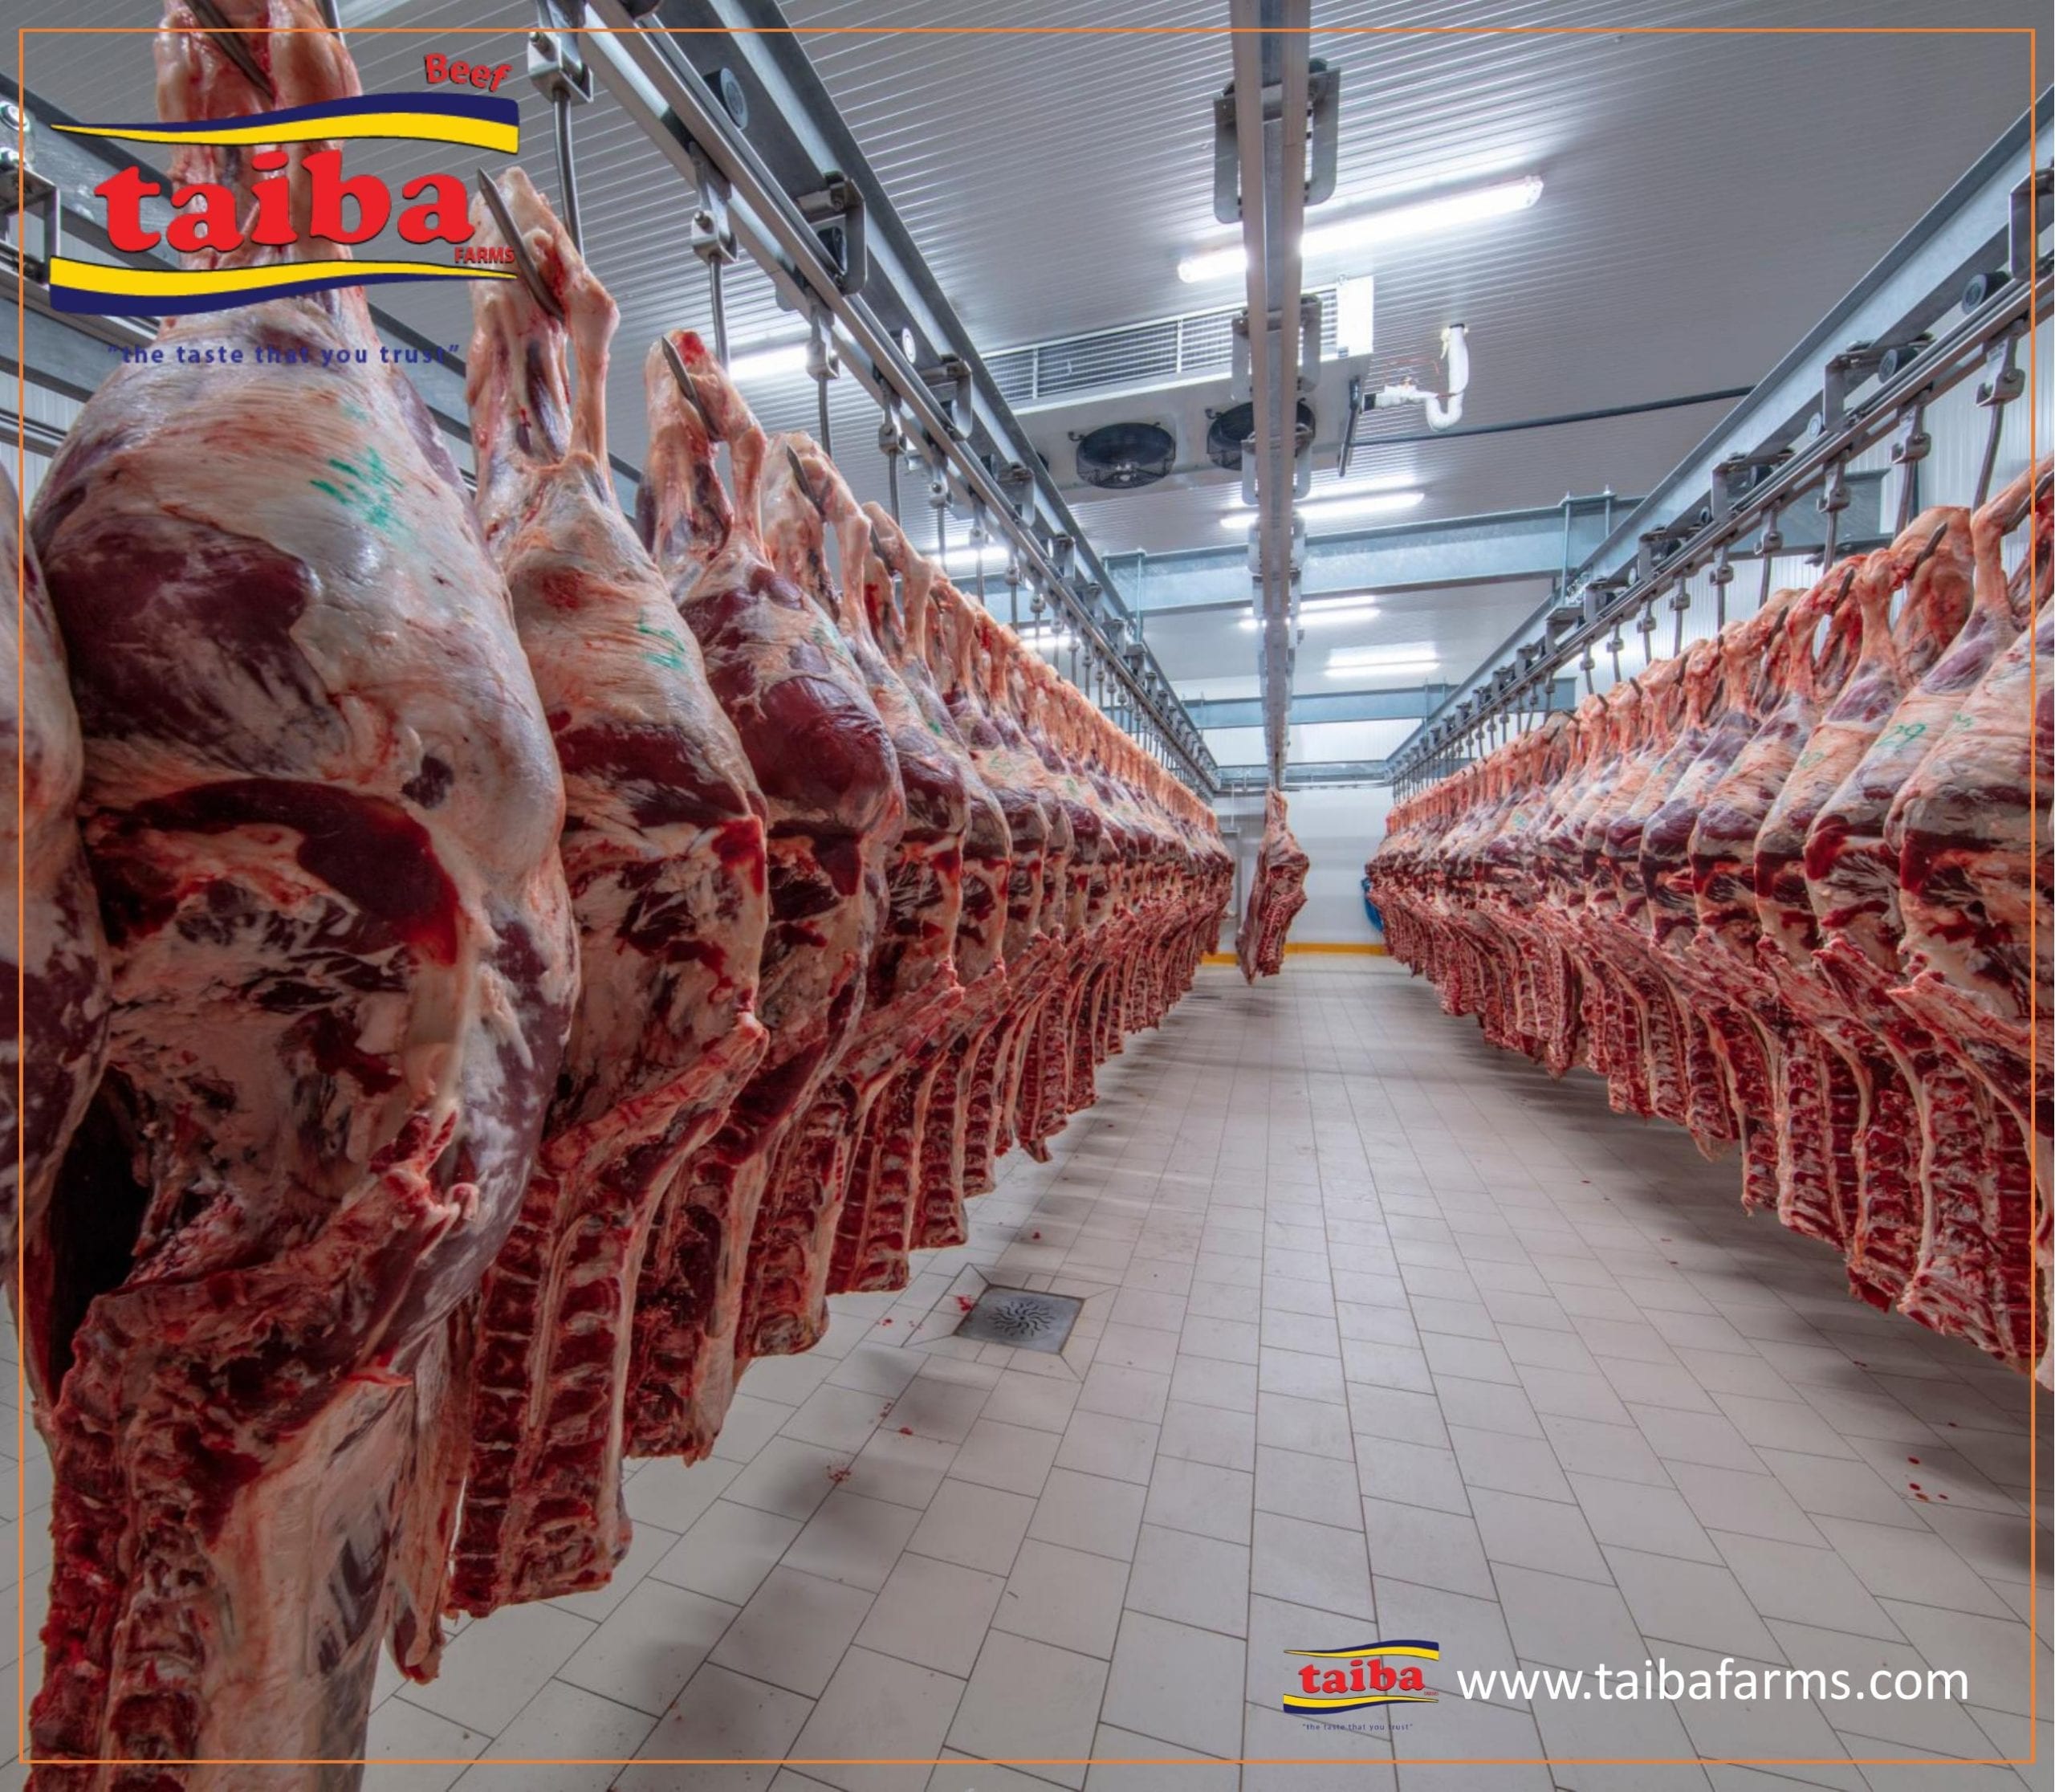 Halal meats: Halal Brazilian meat suppliers and wholesalers